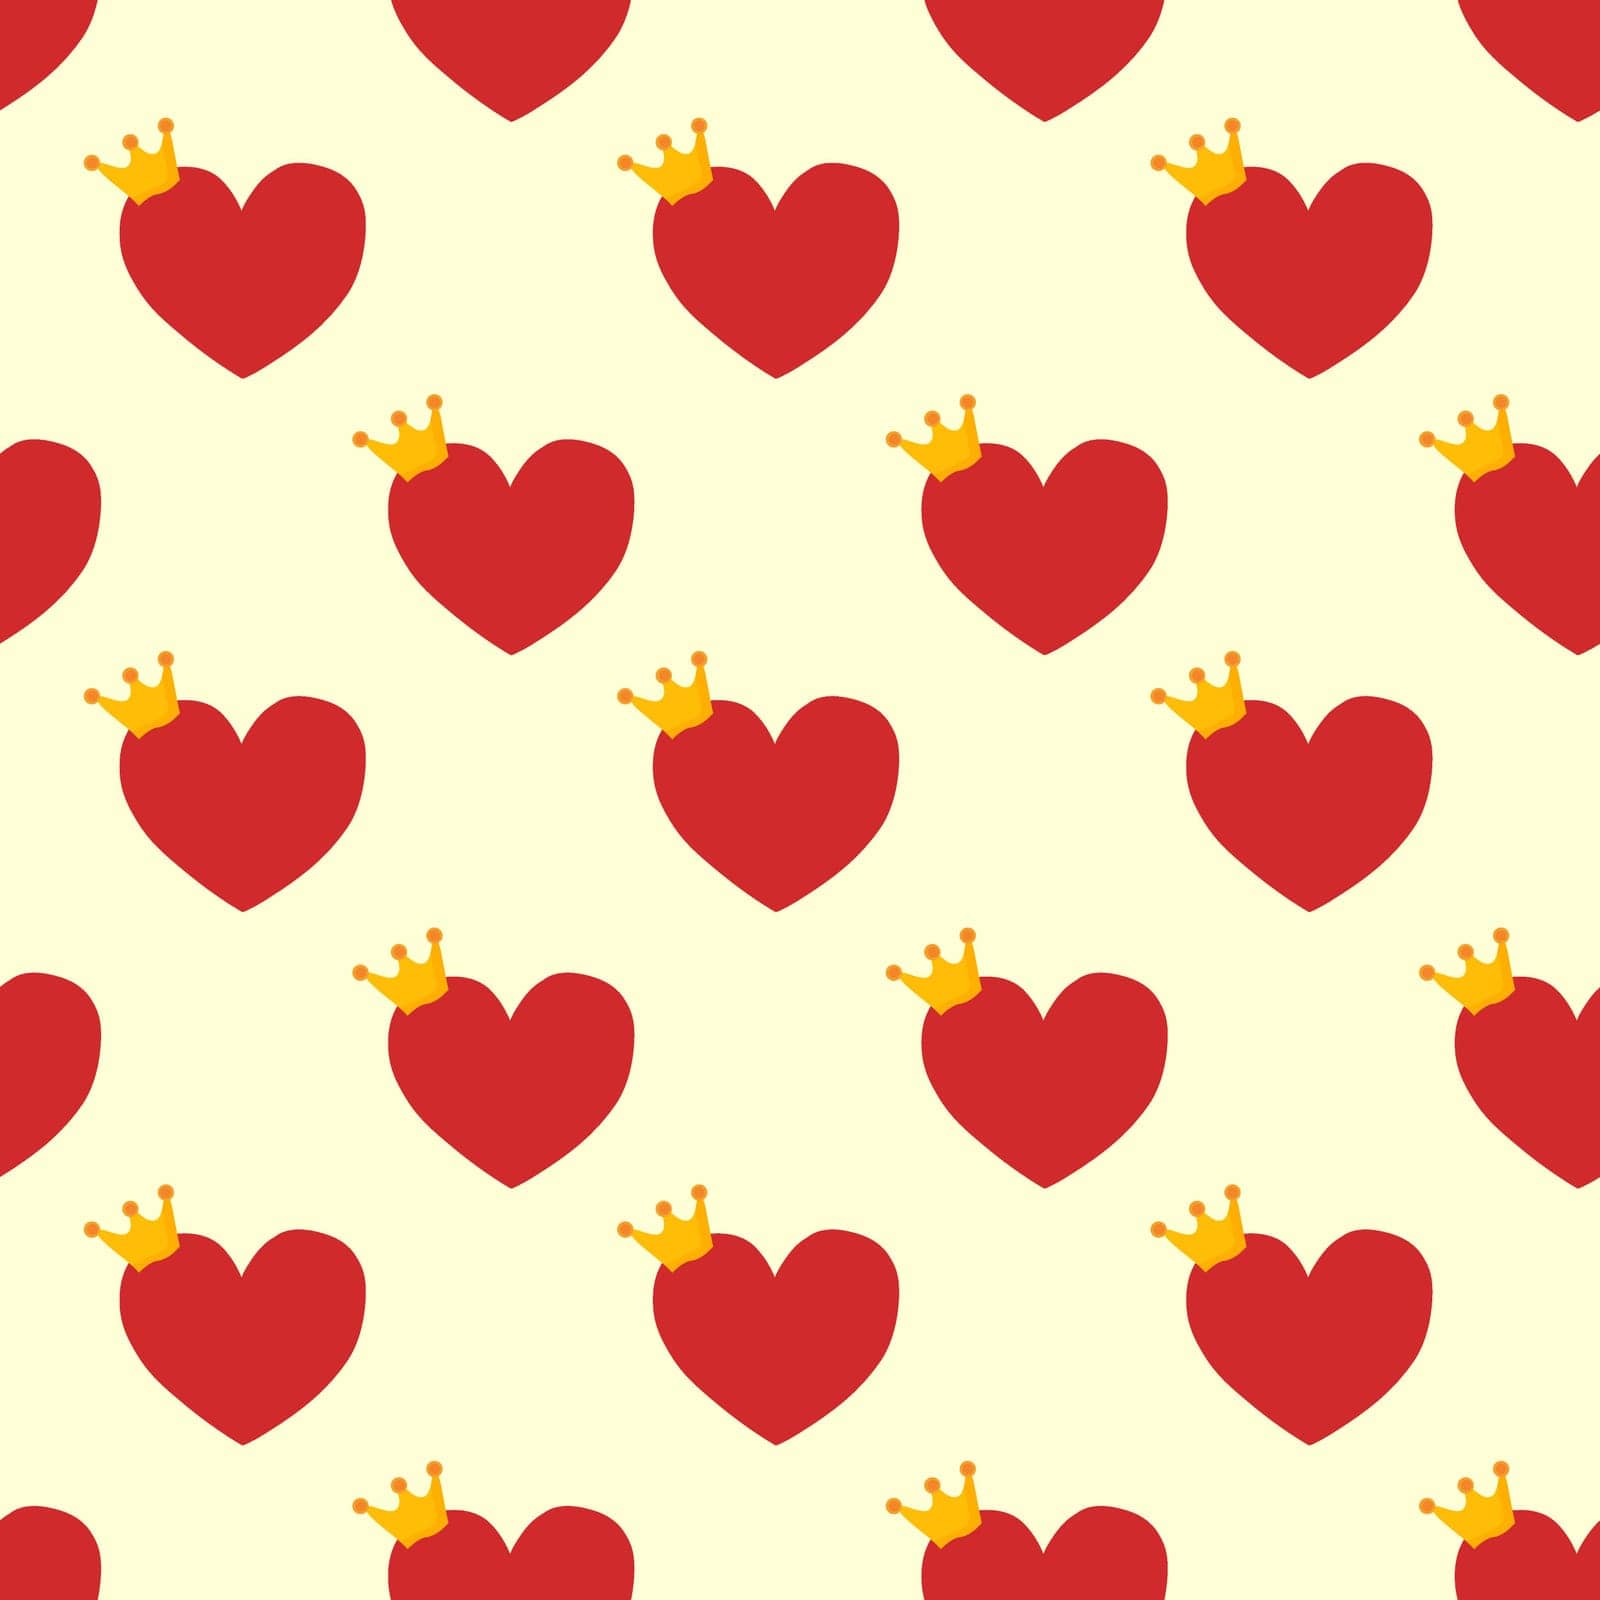 Repeated Red Hearts with crowns drawn by hand. Cute seamless pattern for girls. Sketch, doodle, scribble. Endless girlish print. Girly flat vector illustration. by Novikova